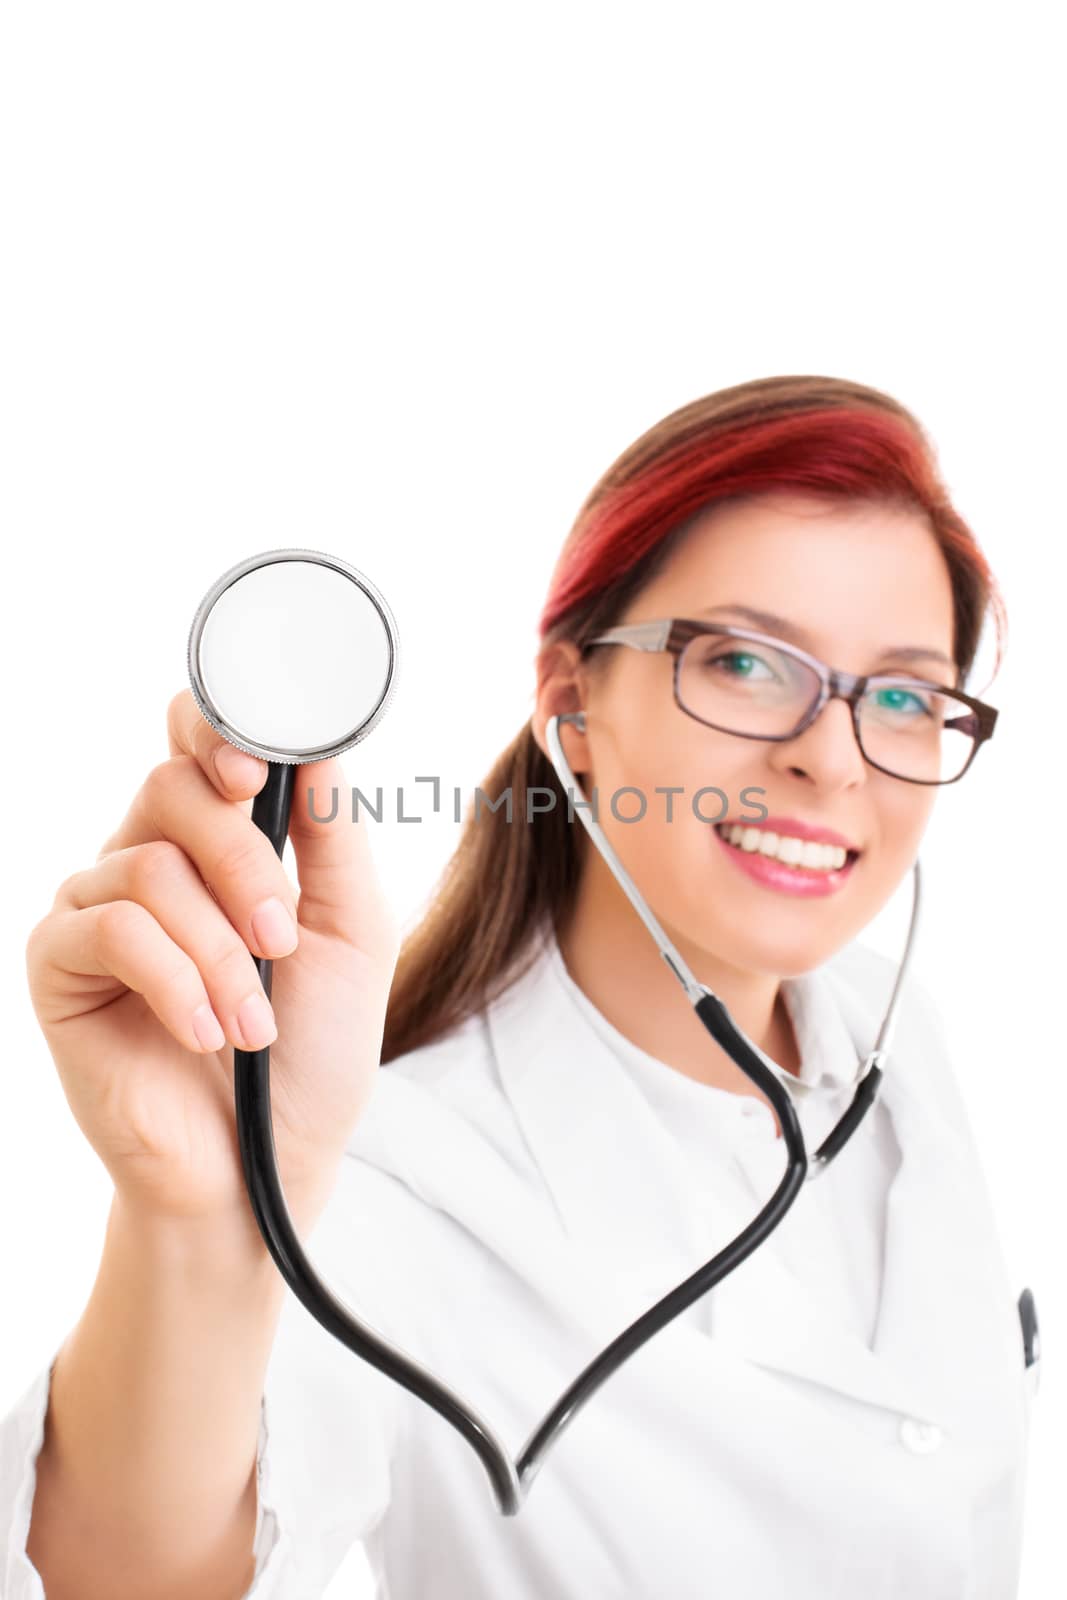 Young smiling doctor holding a stethoscope by Mendelex